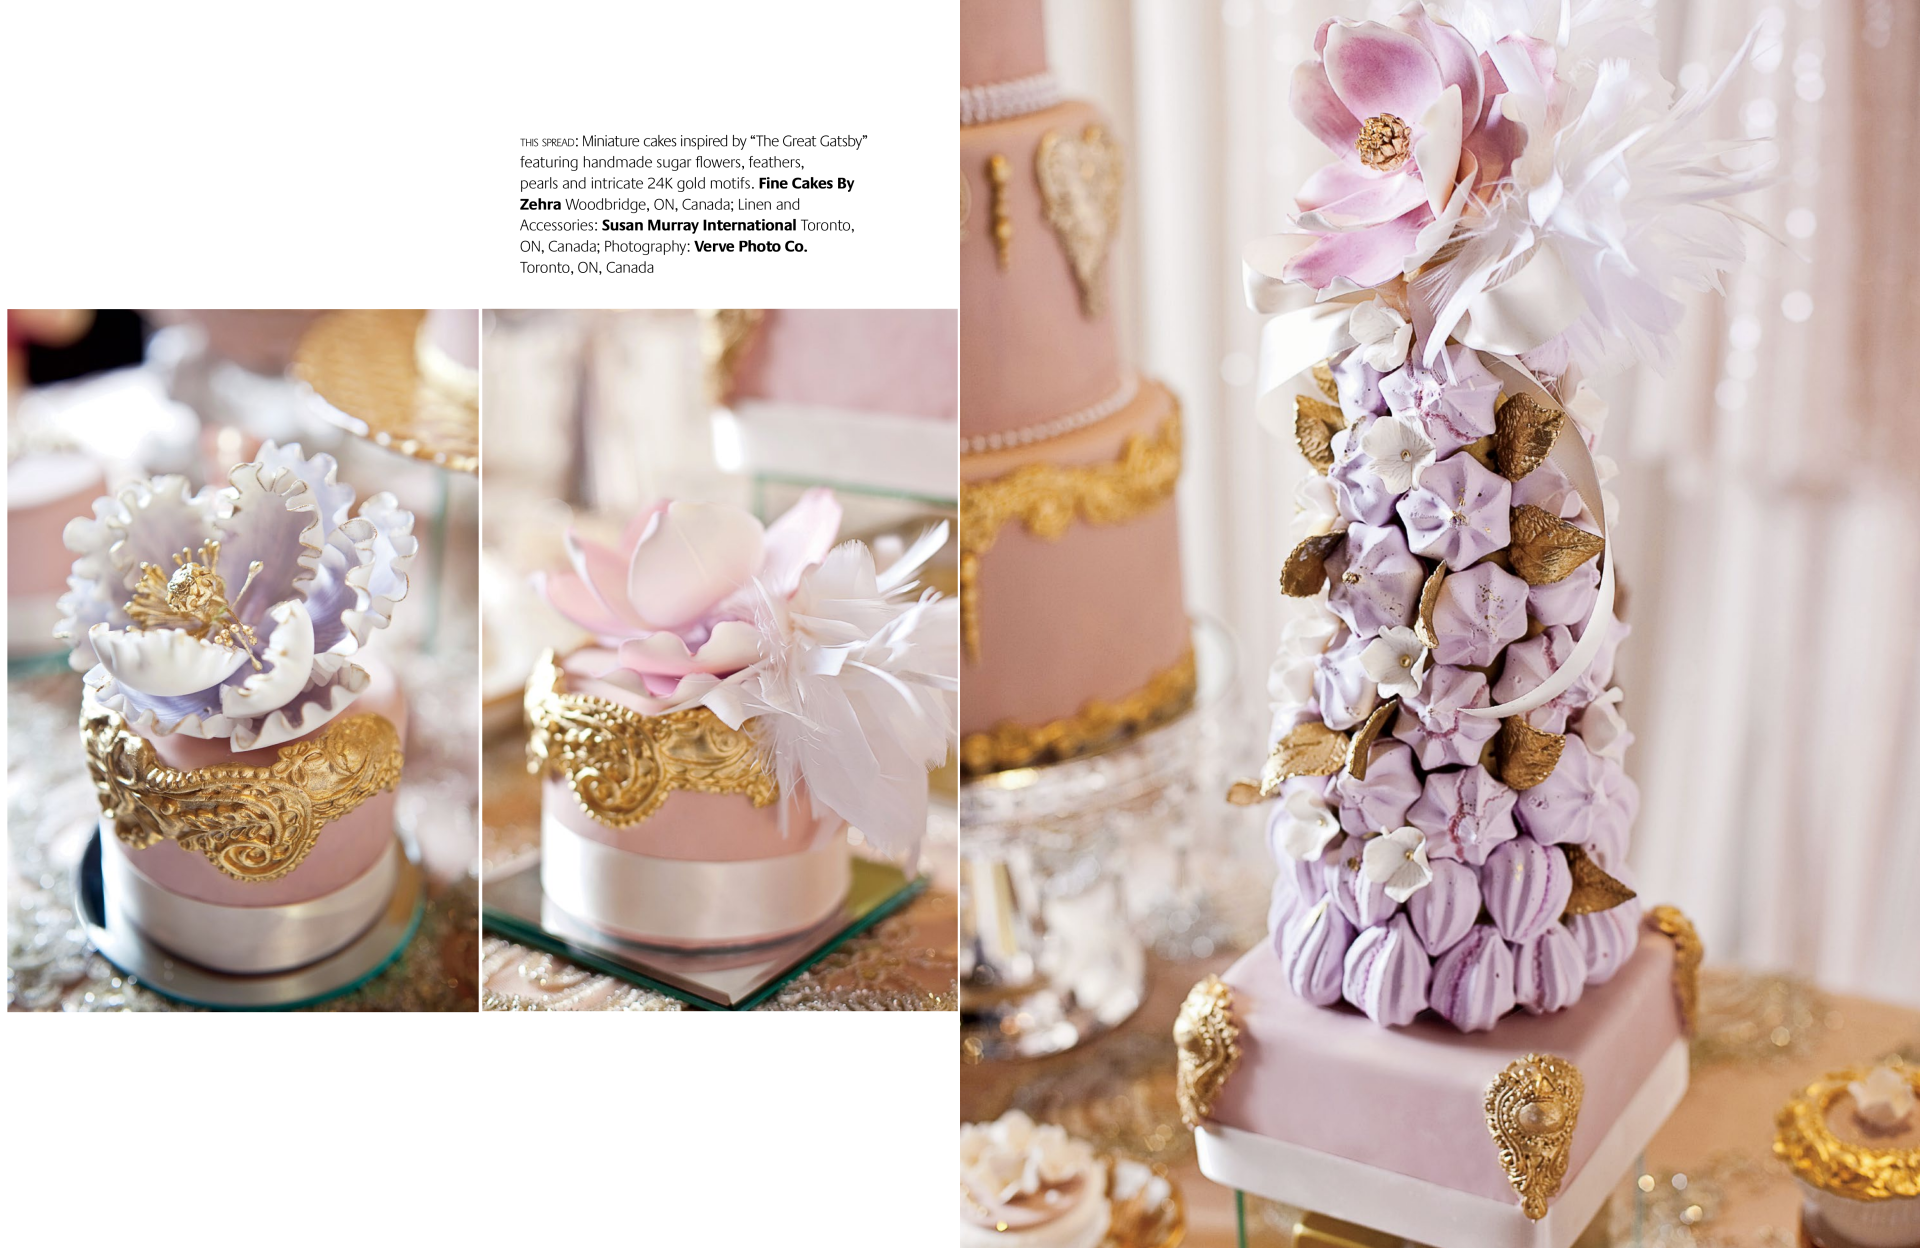 Tiered Cake Studio - Cookies for a lingerie party